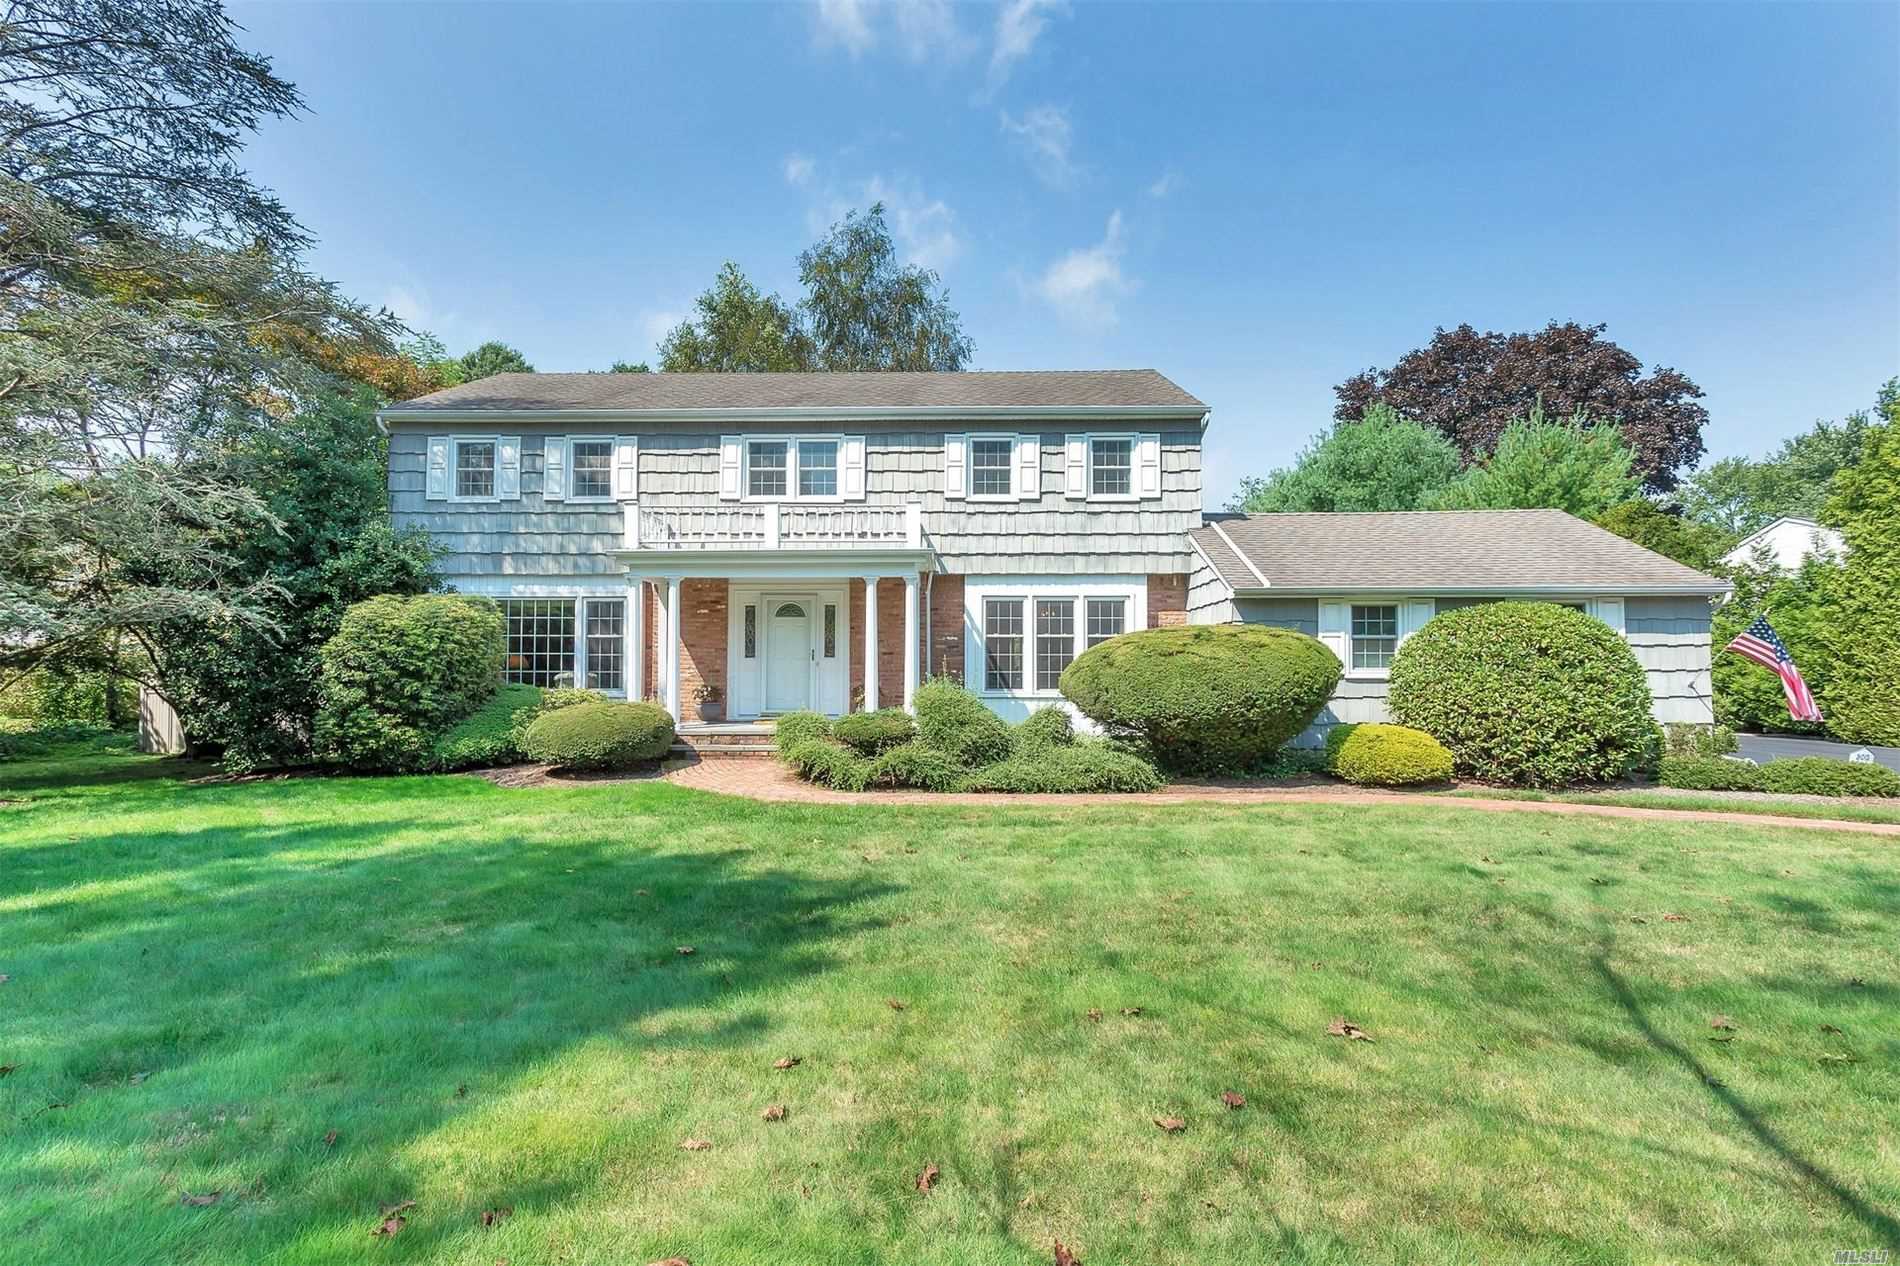 Impeccably Decorated, Designed & Lovingly maintained Harborfields SD Colonial with Picturesque 20x40ft Heated Pool with Armortec Patio surrounded by just shy Flat Acre Back Yard Haven.Open Plan Living with Classic Quality Finishes & Gleaming Hardwood Floors throughout (even below soft sumptuous spotless carpets). Quaker Cabinets+Granite, Eat-in-Kitchen High End Appliances Gas Wolf Burner/Stove, Bosch Drawer Dishwashers.French Doors to 30x18ft Entertainers Deck from EIK & Family Room w/gas FPL.